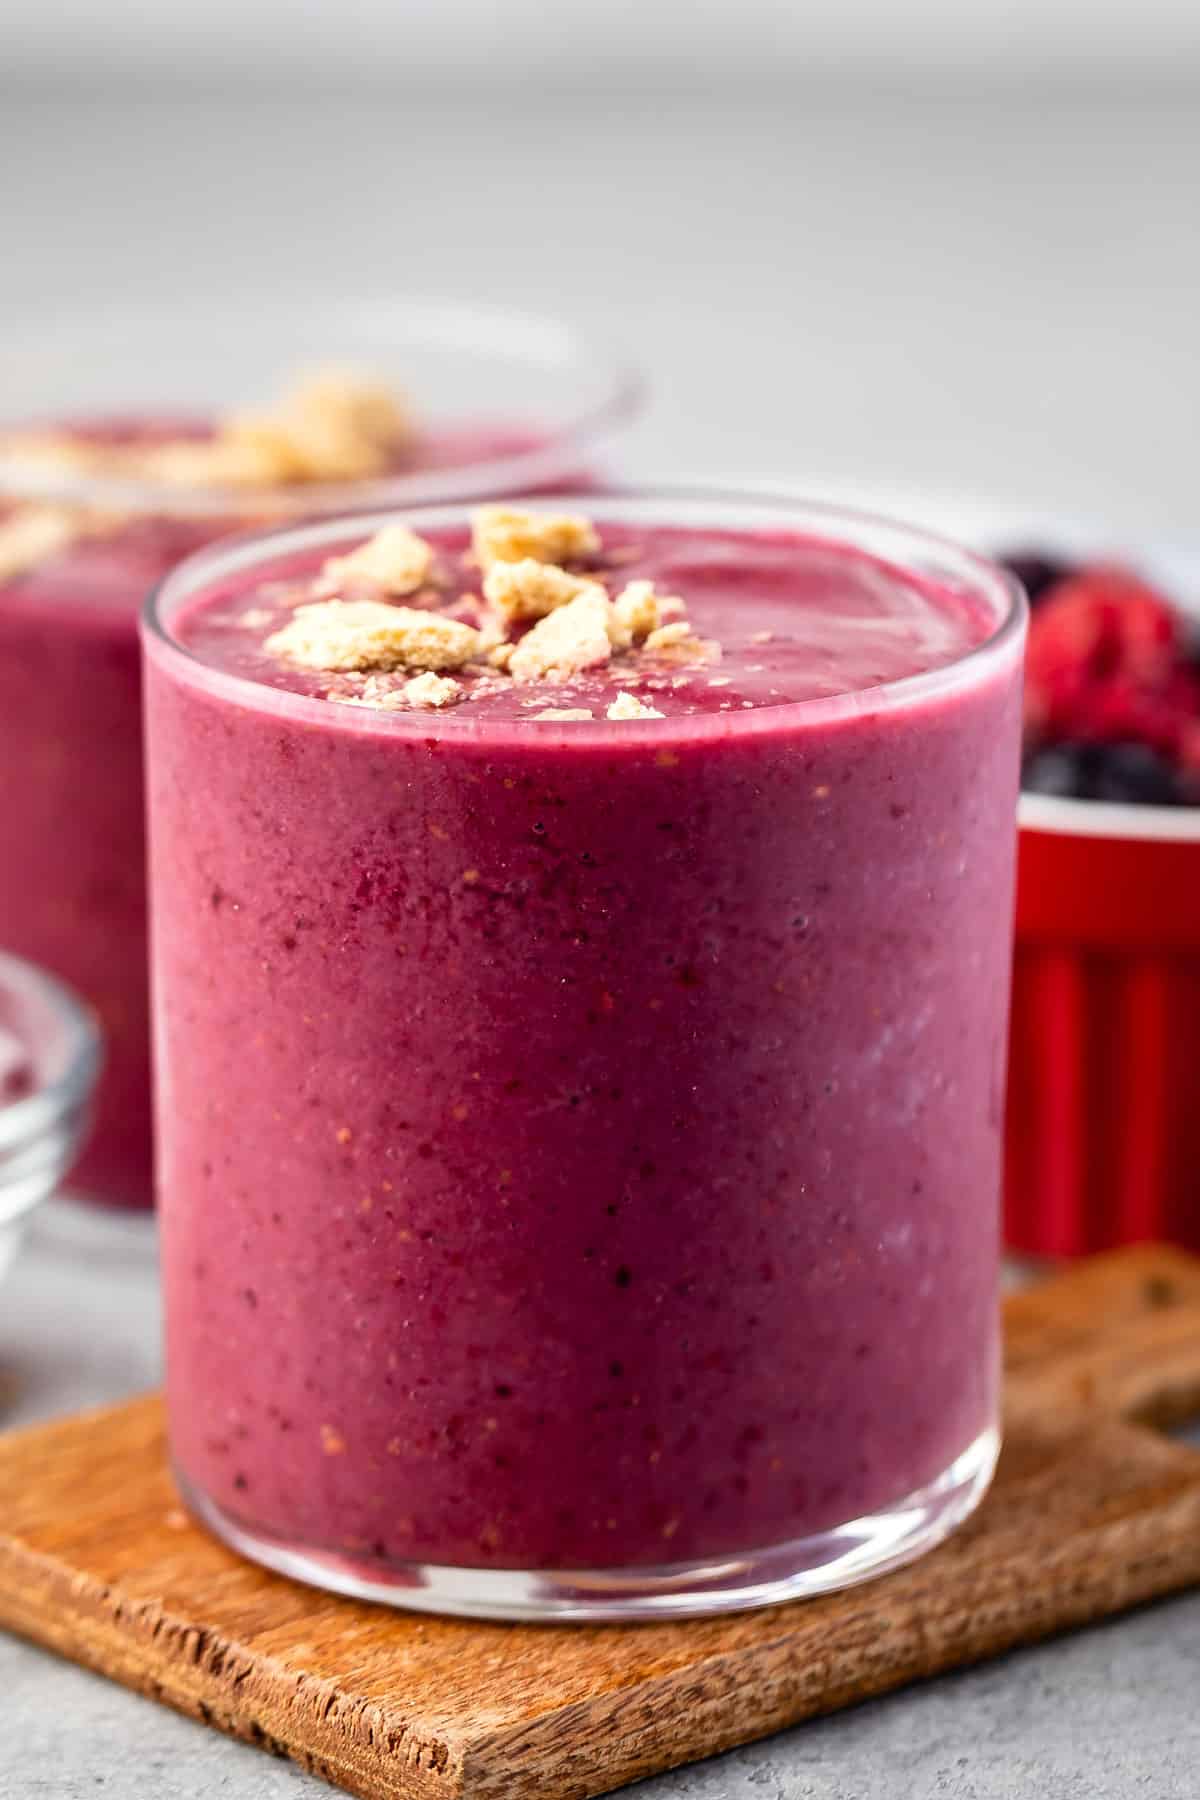 pink smoothie in a clear glass with crumbled cookies on top.